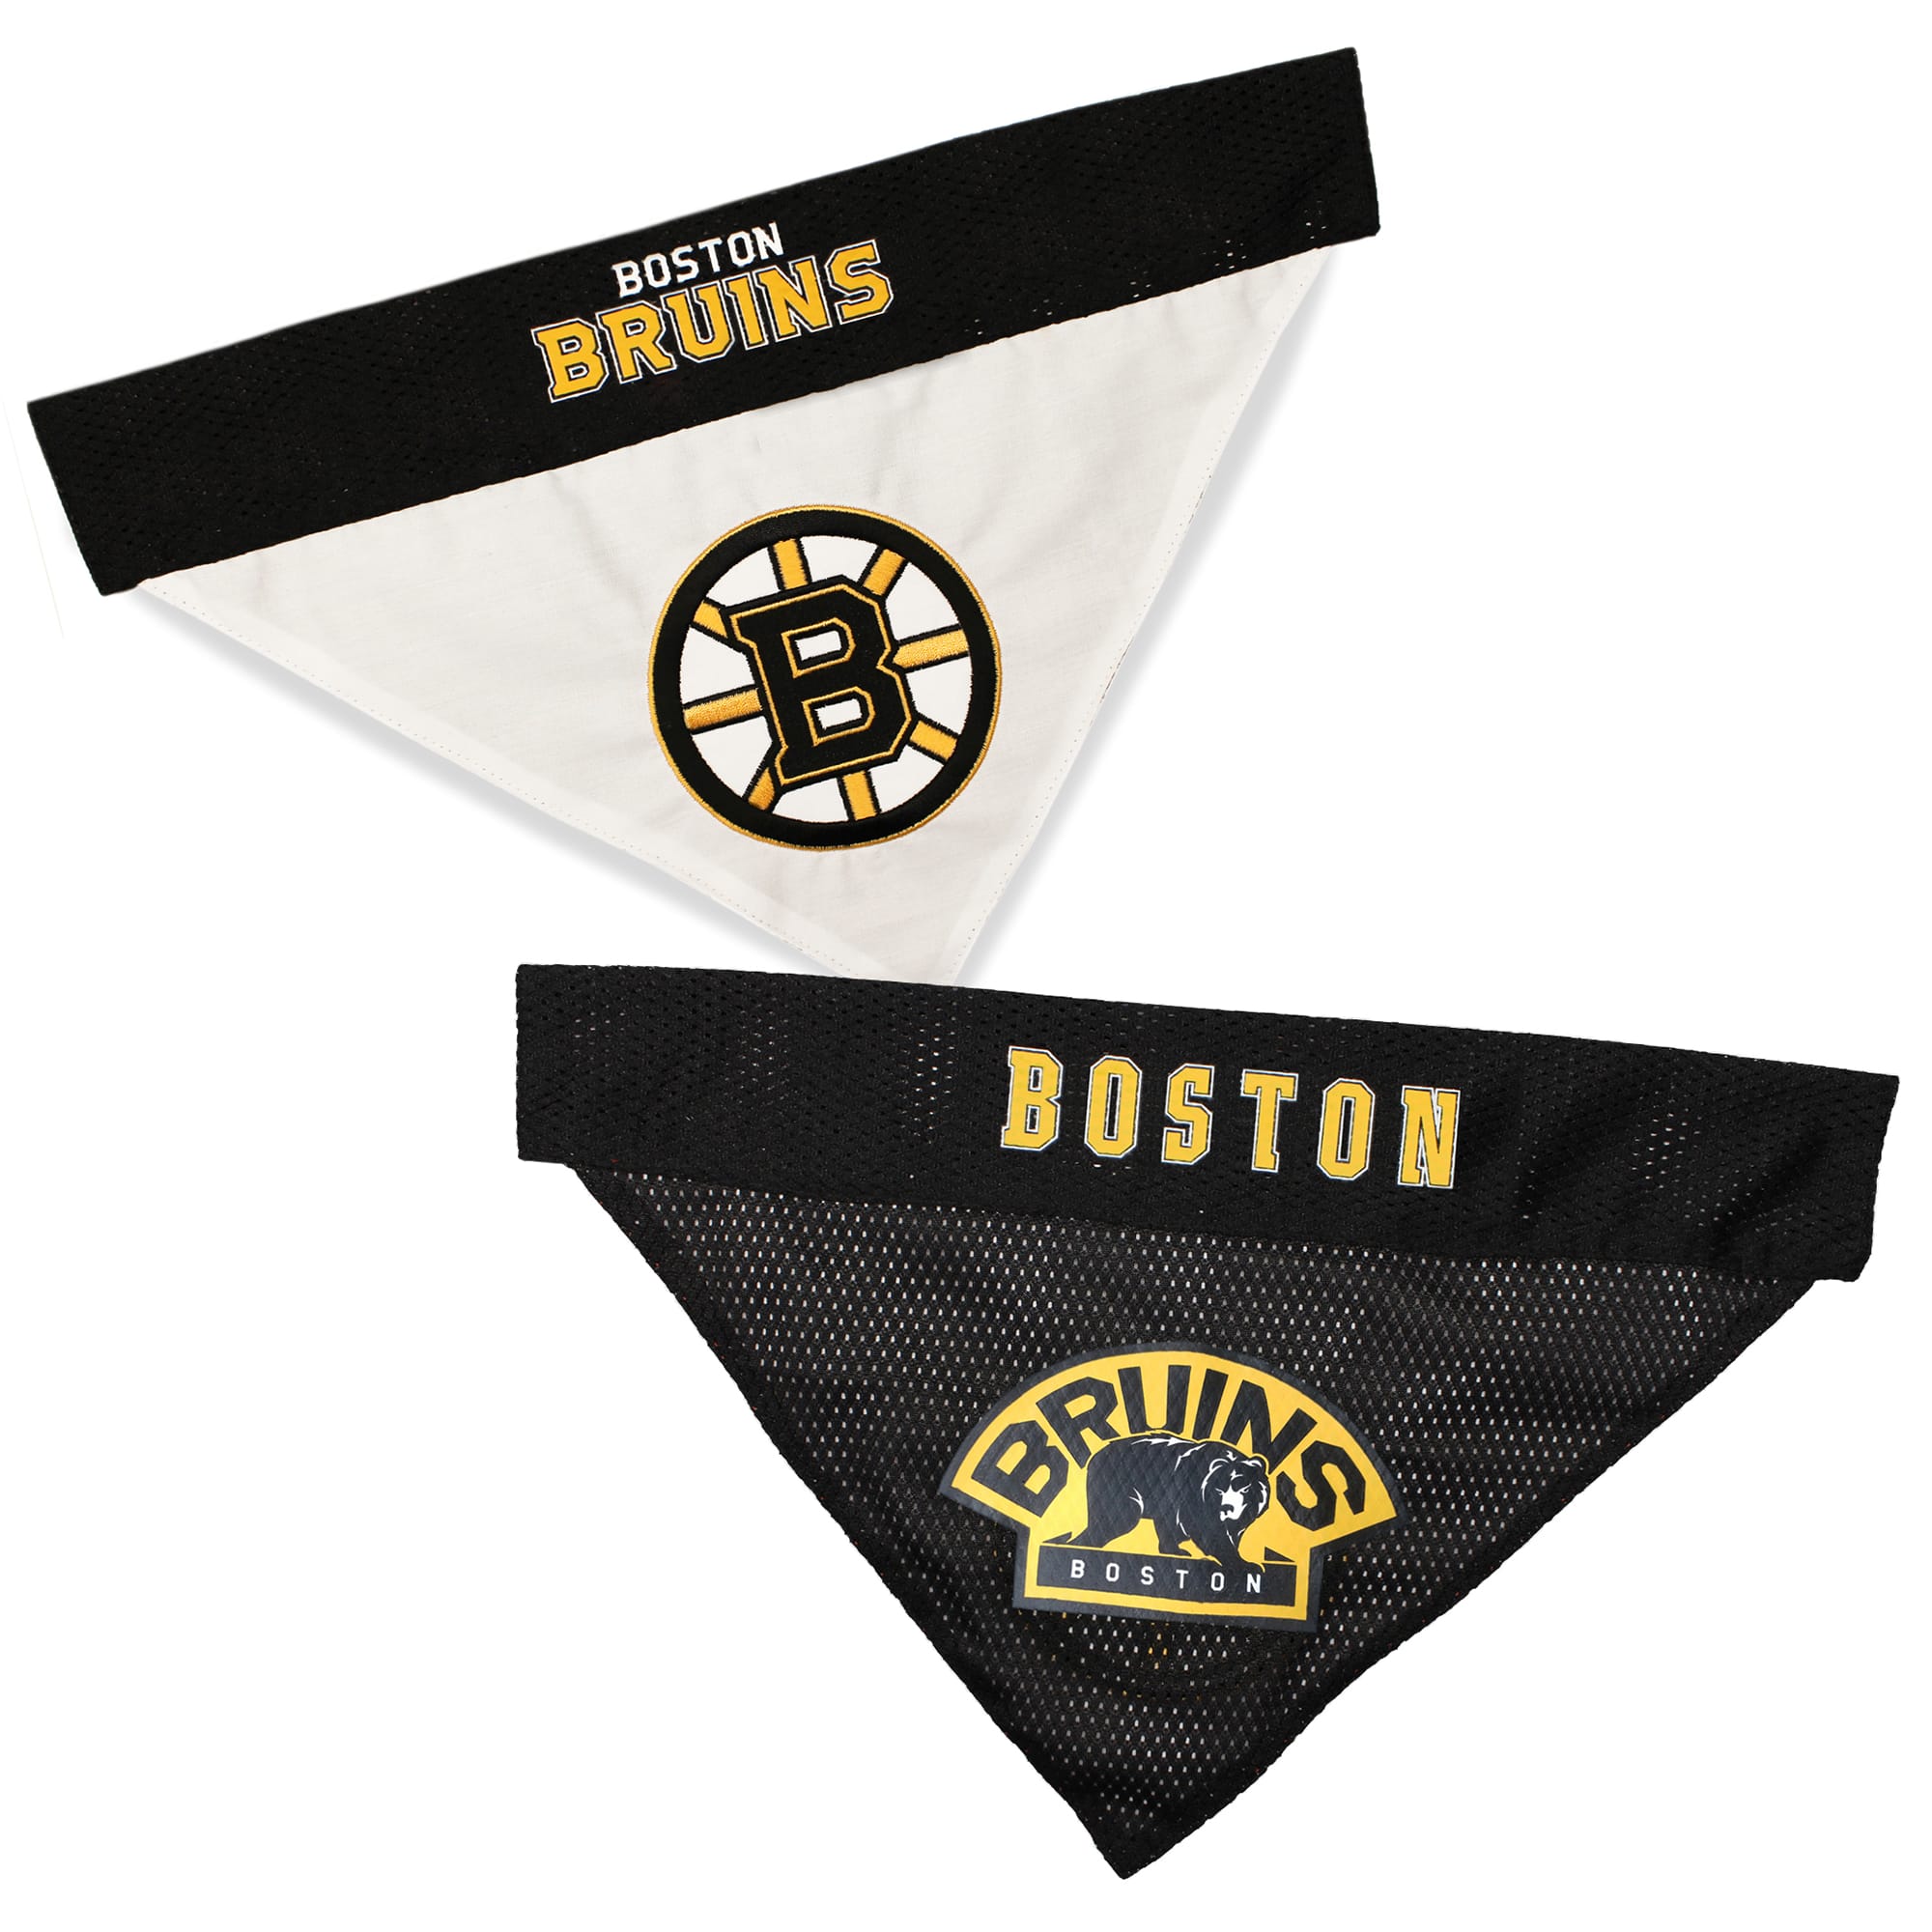 All Star Dogs Boston Bruins Pet Outerwear Jacket, XX-Small